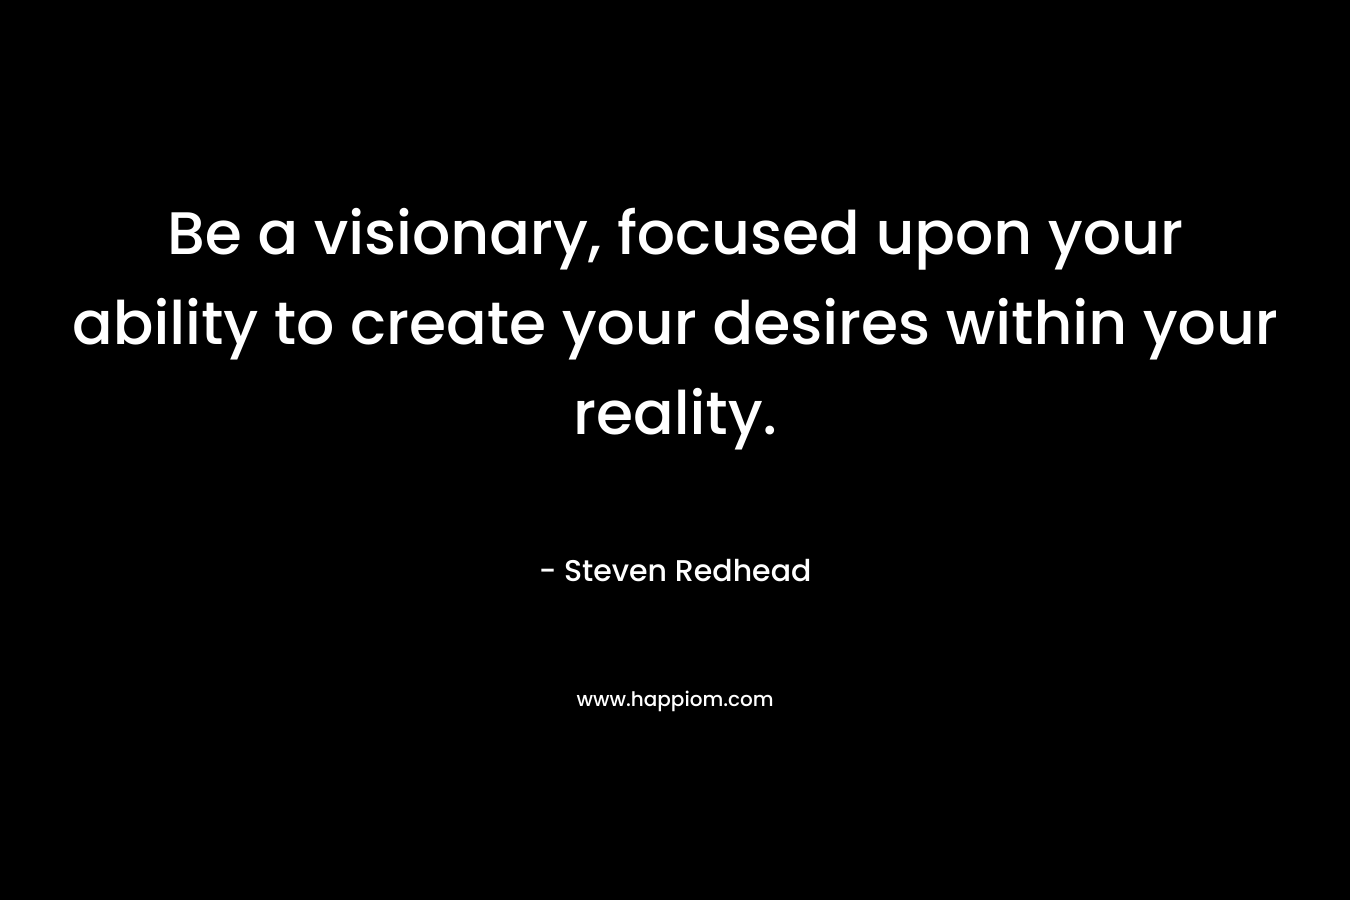 Be a visionary, focused upon your ability to create your desires within your reality.